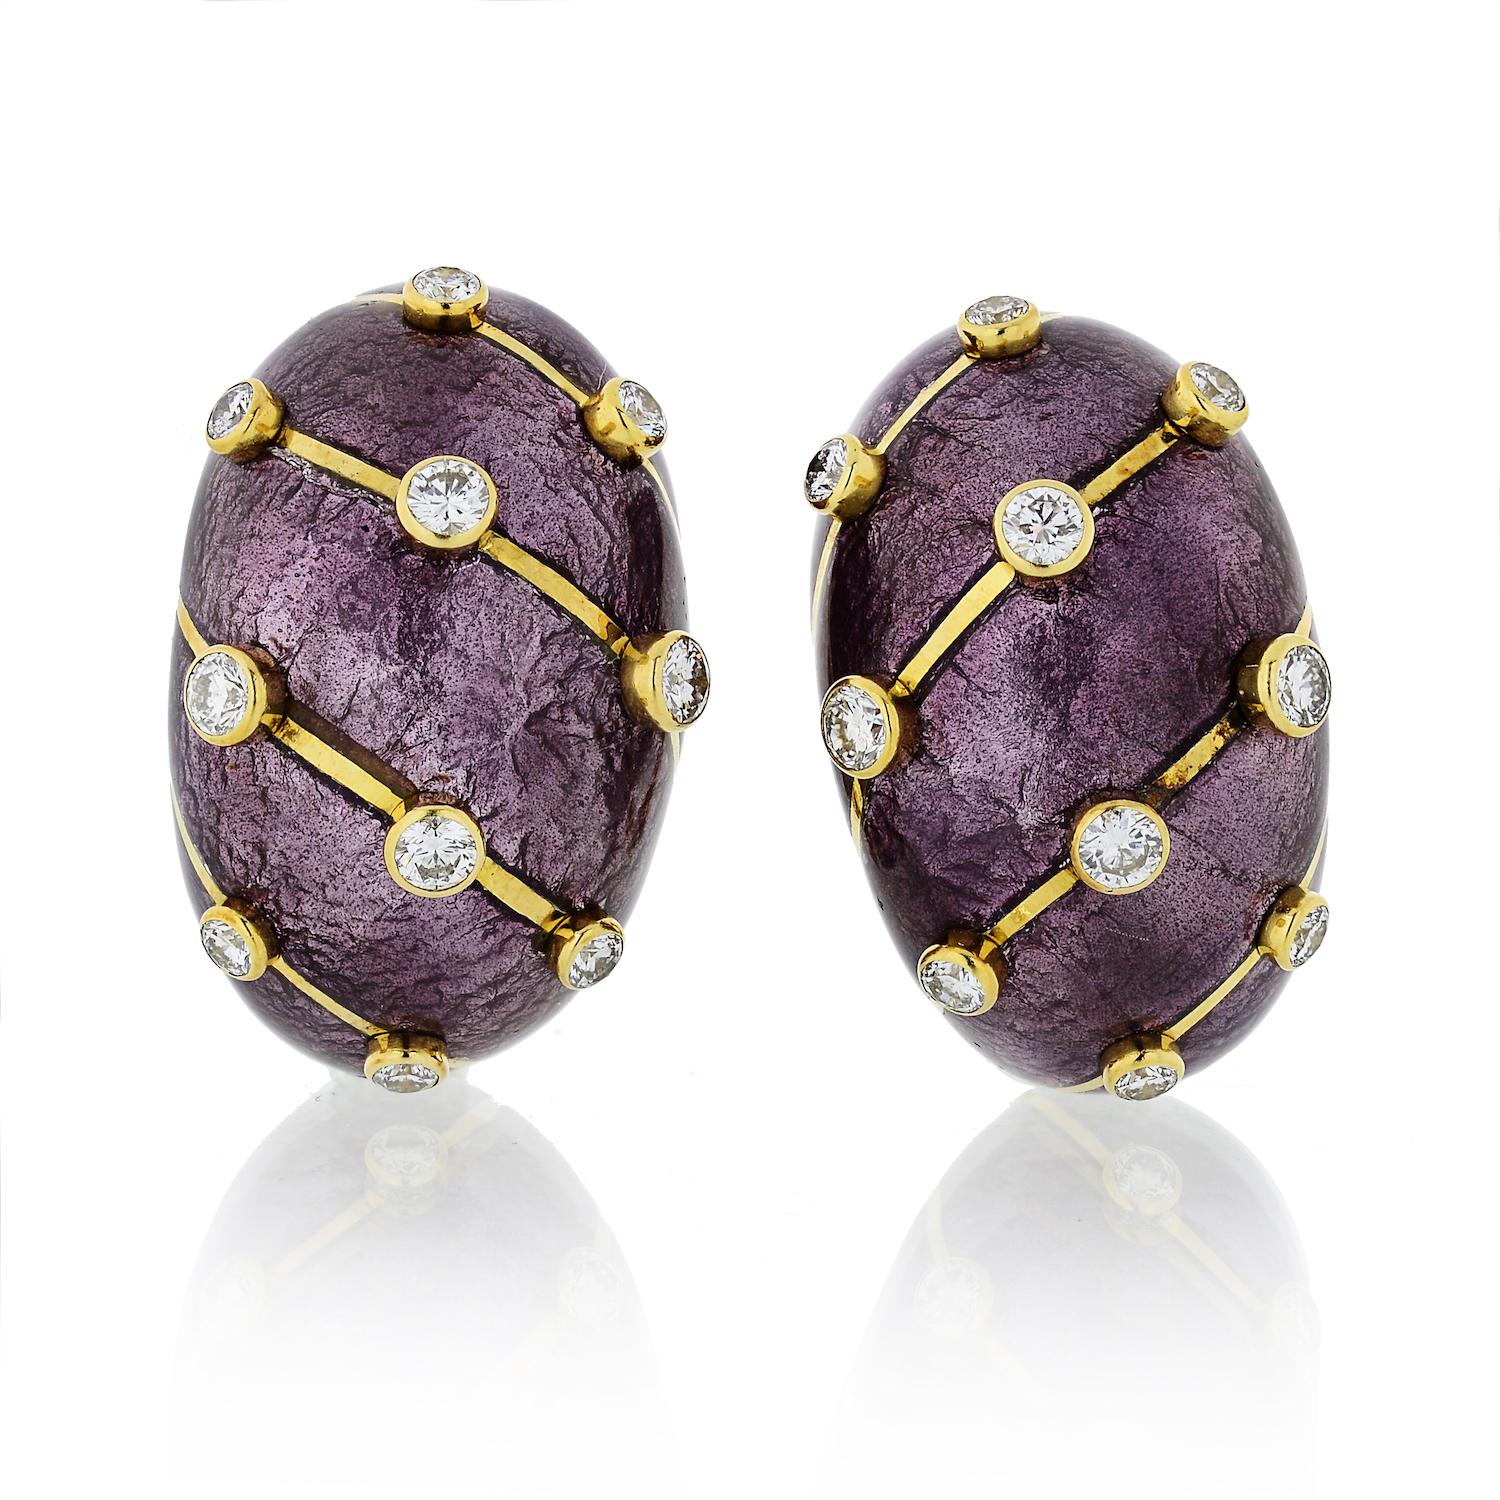 Jean Schlumberger lilac enamel banana diamond earrings. METAL: 18K gold with rare custom purple enamel
GEMSTONE(S): round brilliant-cut diamonds approx. 1.30 carats total, most F-G/VS
MEASUREMENTS: 1 x 5/8 inch
WEIGHT: 29.70 g.
Signed: TIFFANY & CO.